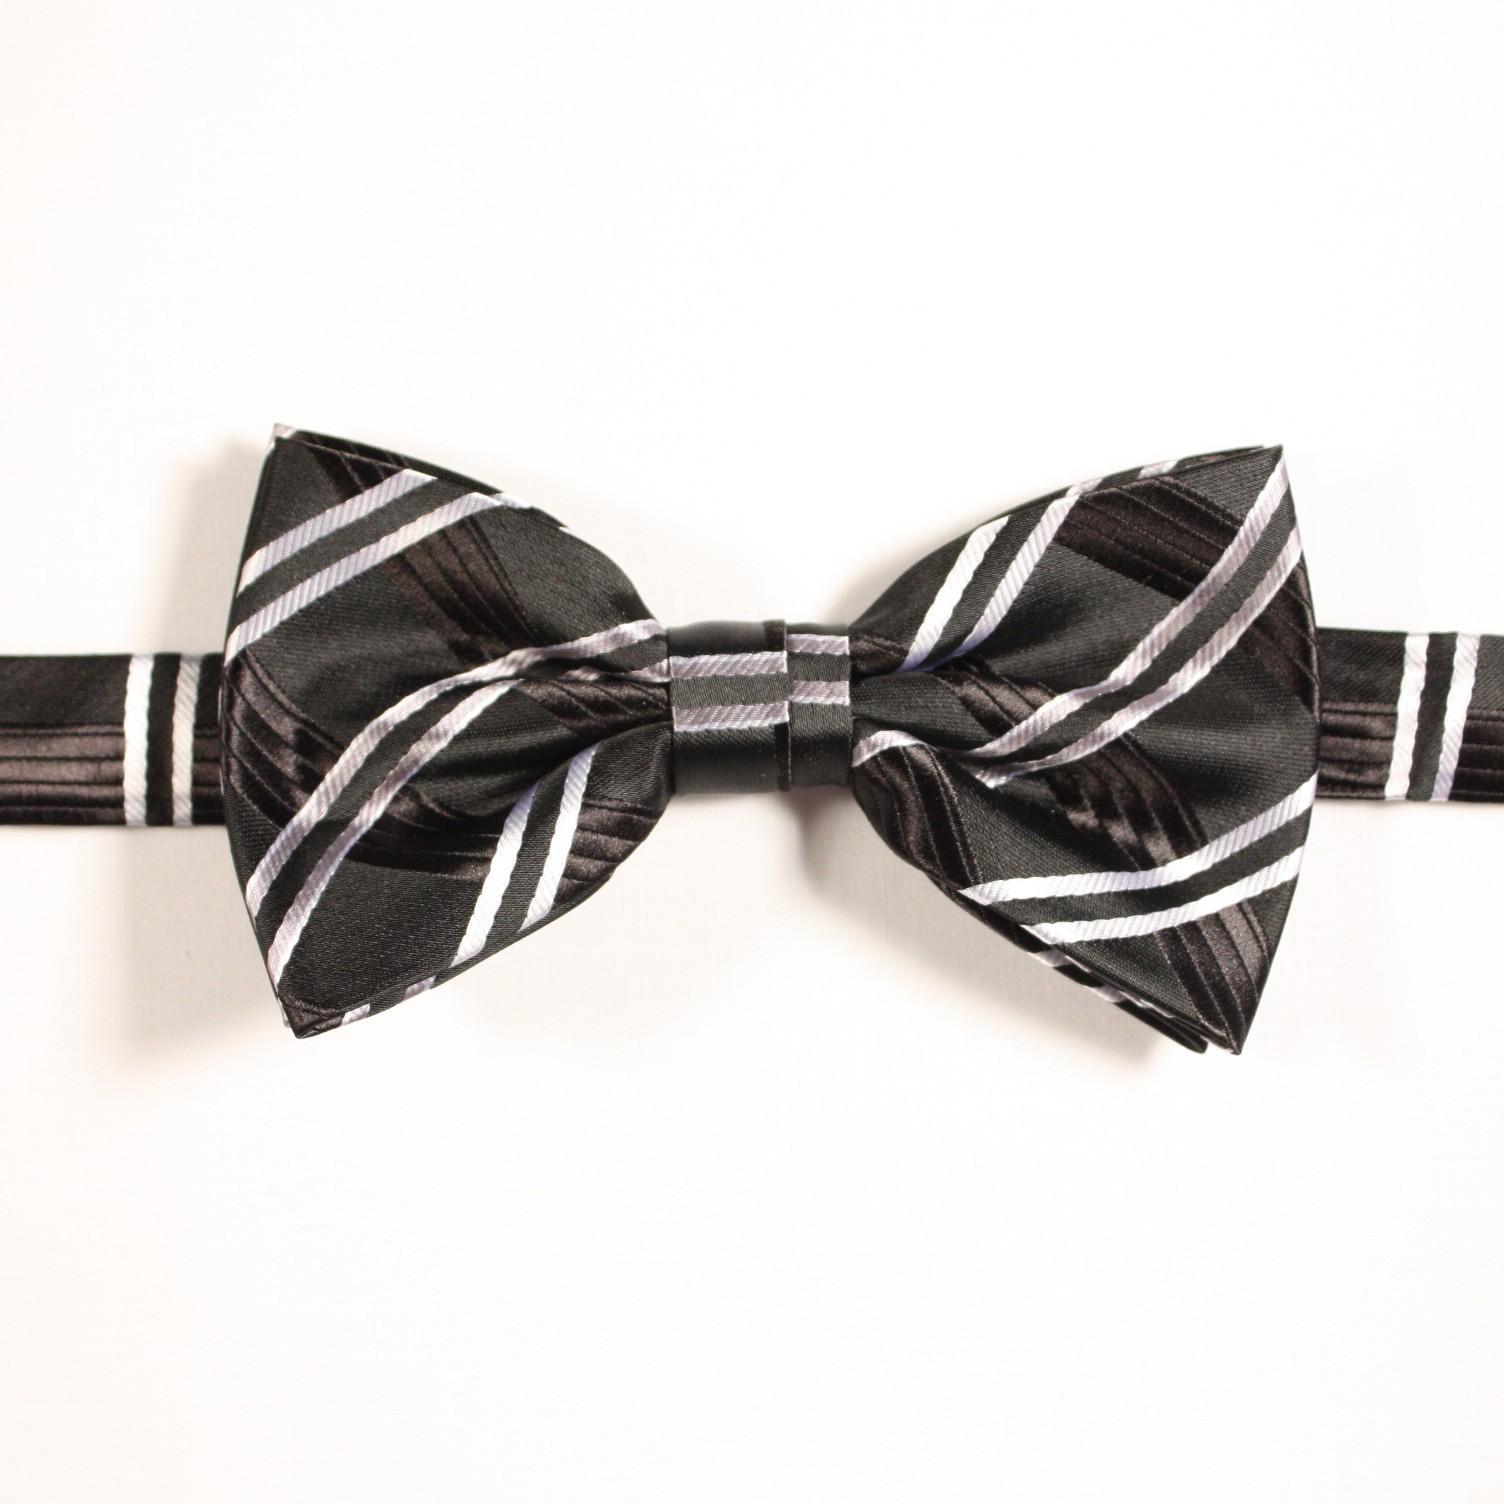 Profound black Bowties with